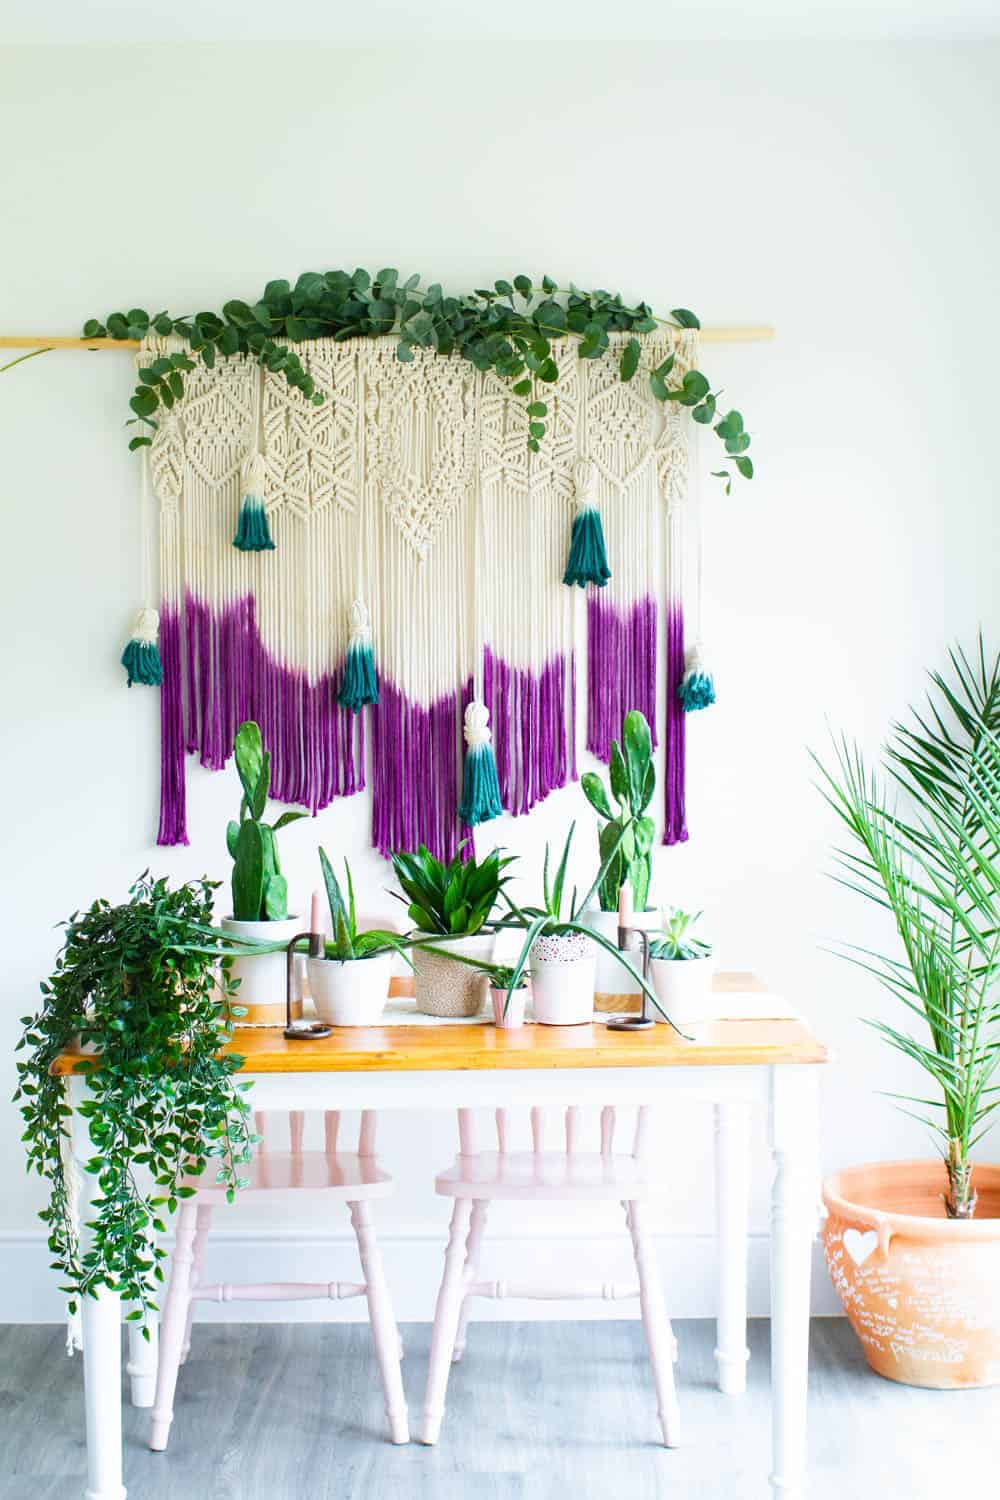 Learn how to make a DIY dyed macrame wall hanging backdrop with this tutorial, perfect for bohemian wedding decor